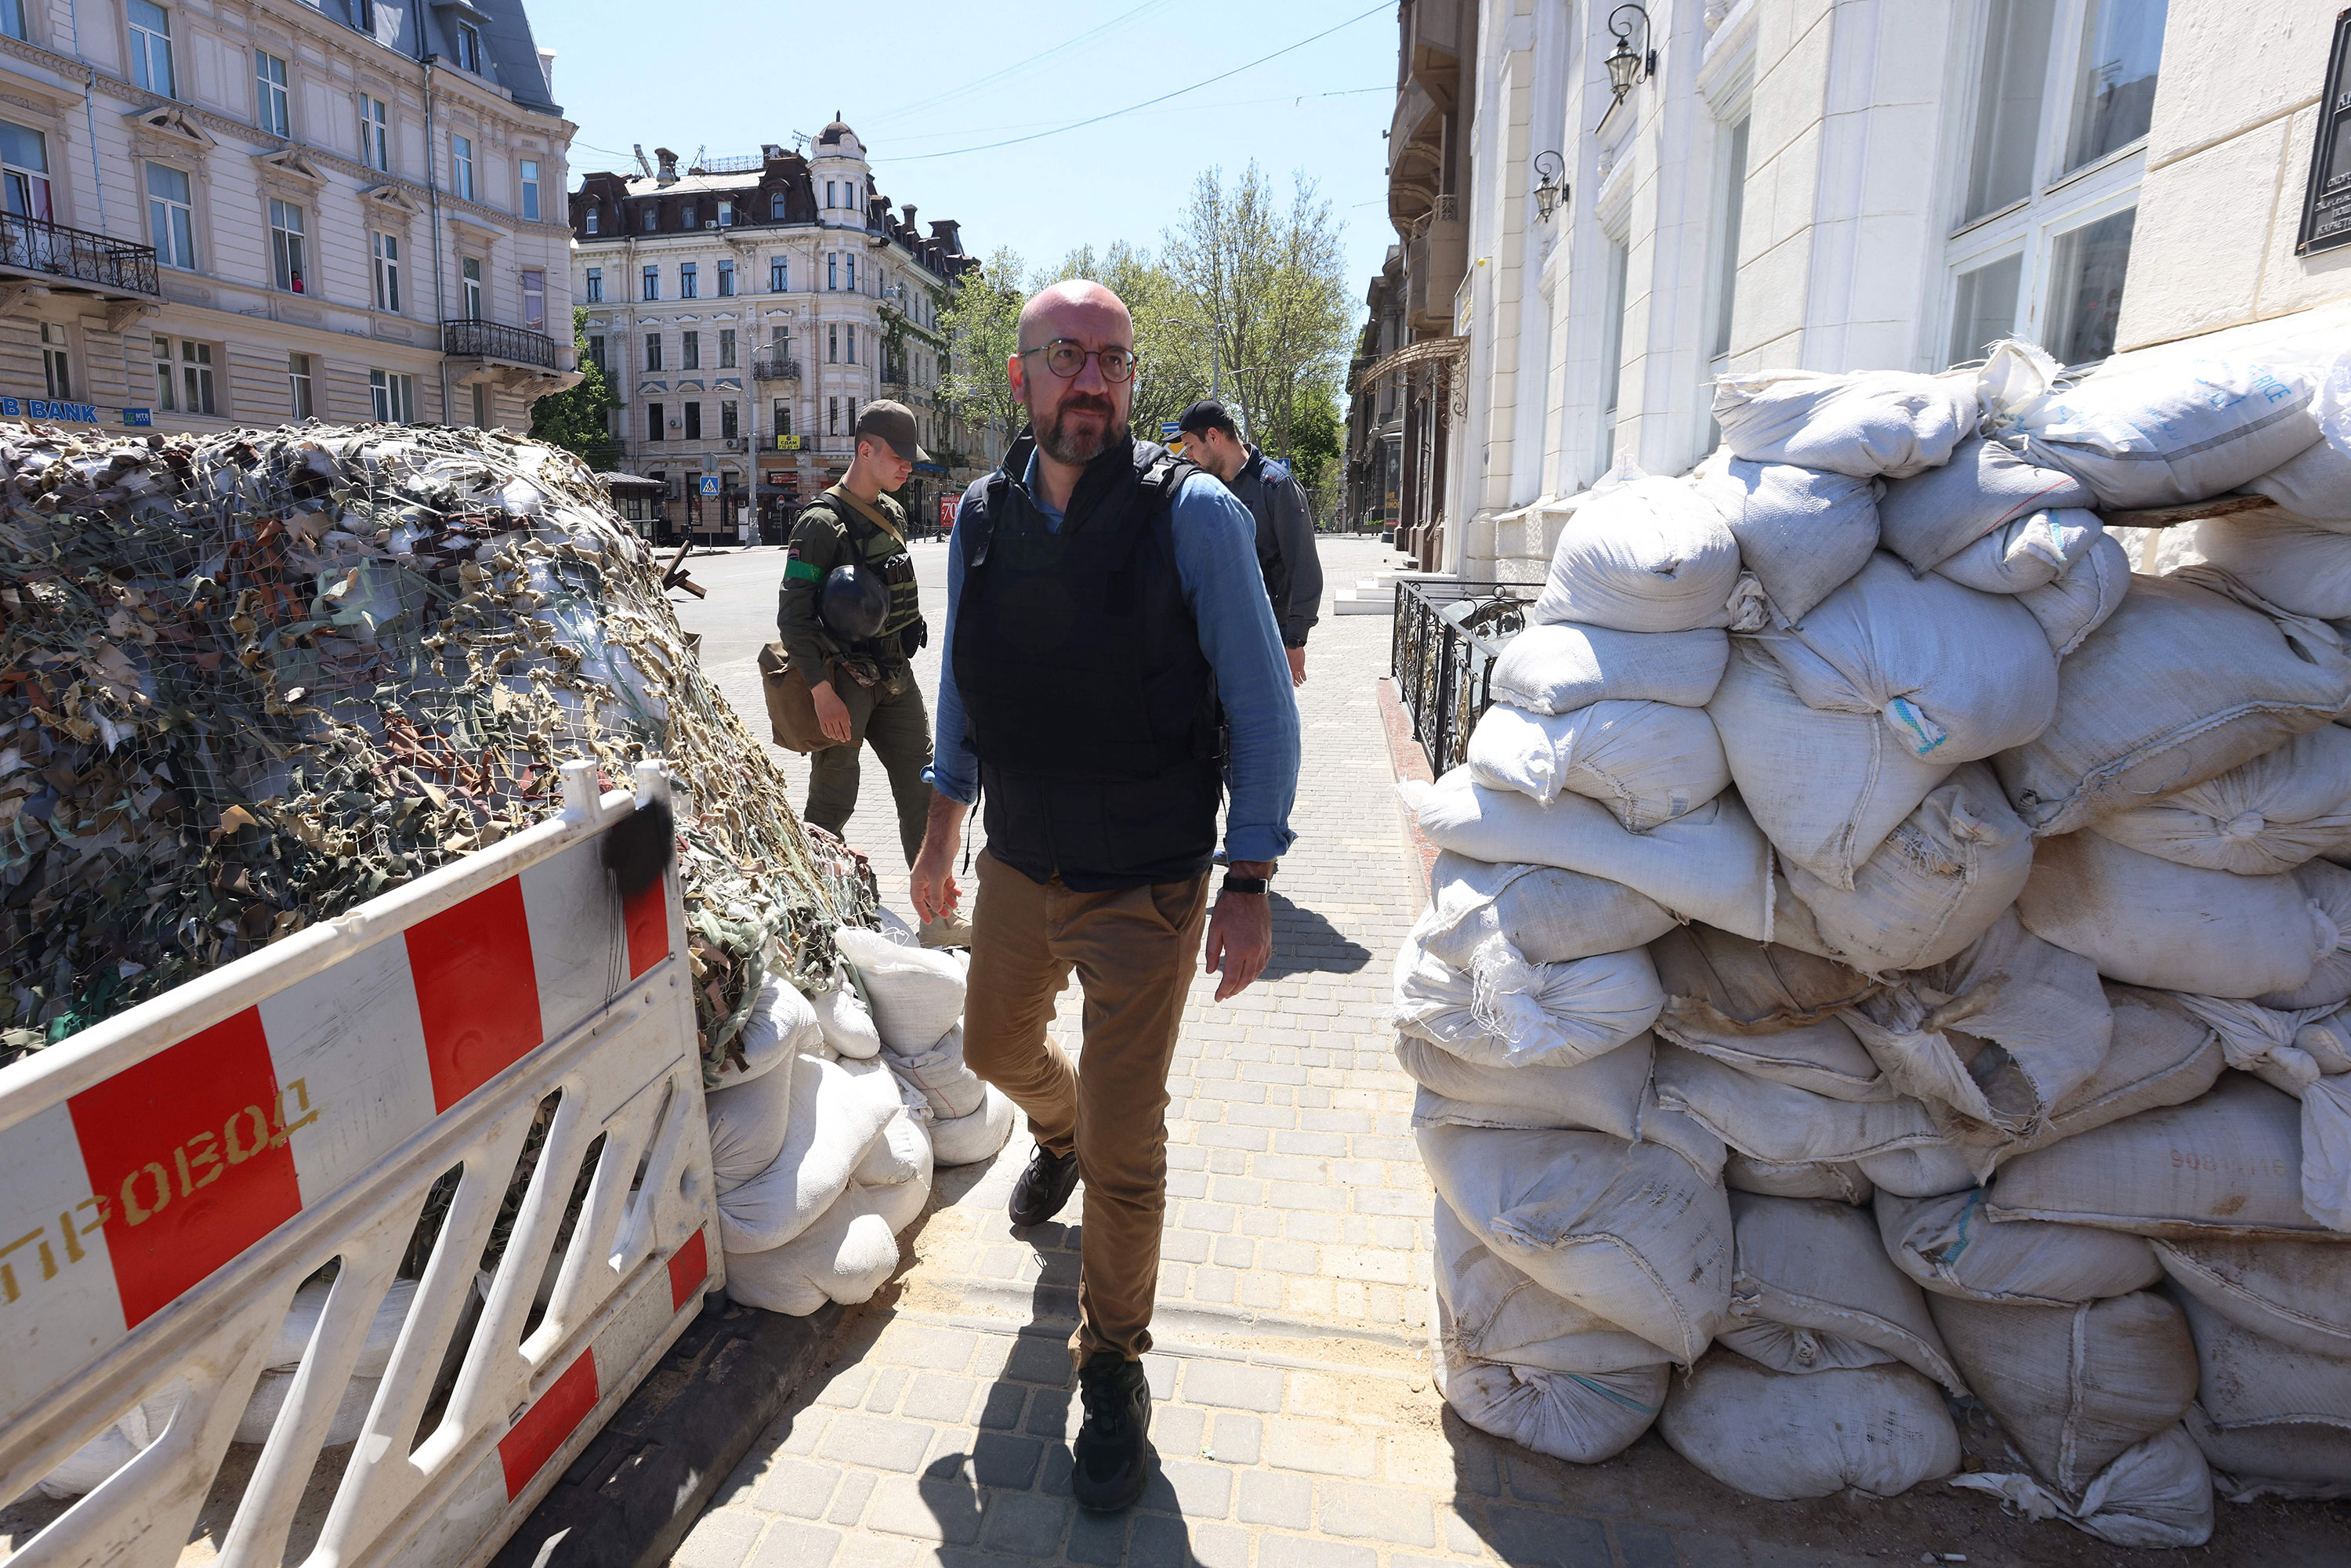 President of the European Council Charles Michel is seen during his visit to Odesa, Ukraine, on May 9, in this picture released by the European Council press office.